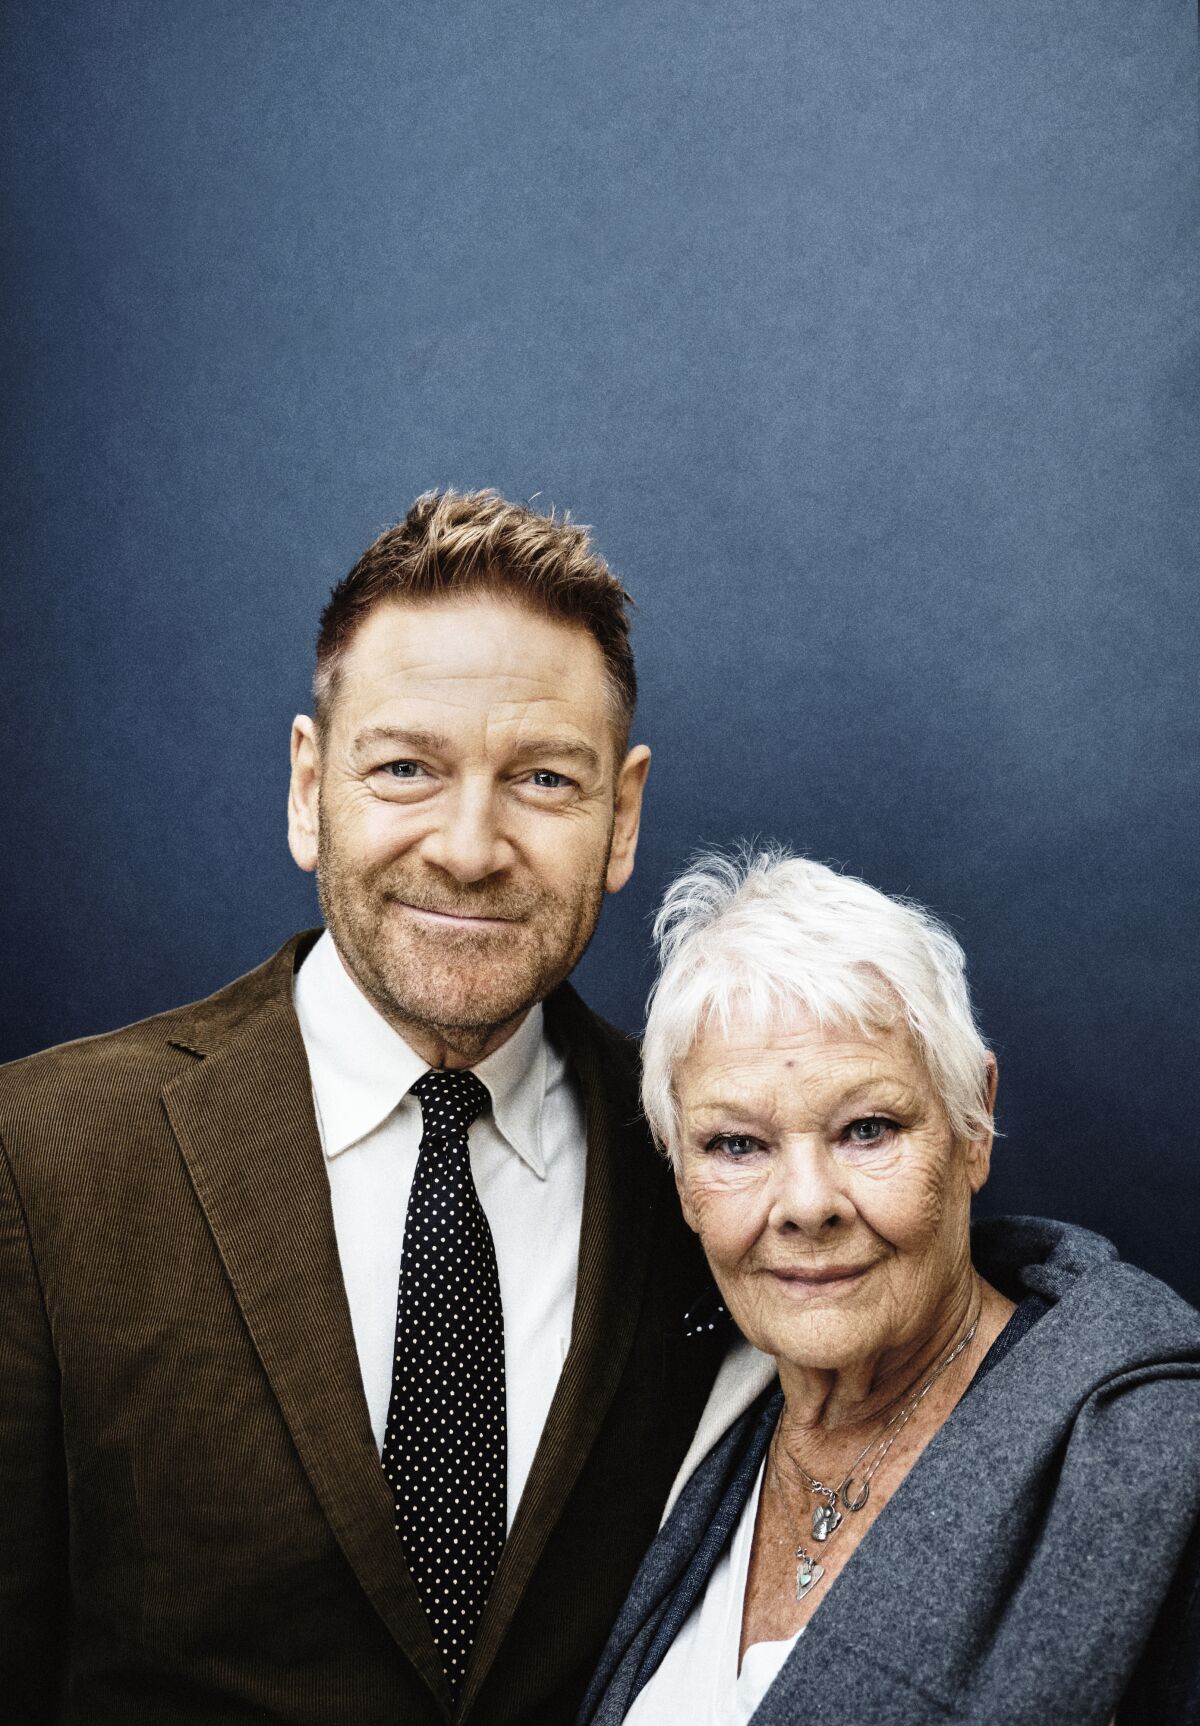 Judi Dench and Kenneth Branagh, reunited again for "Belfast."